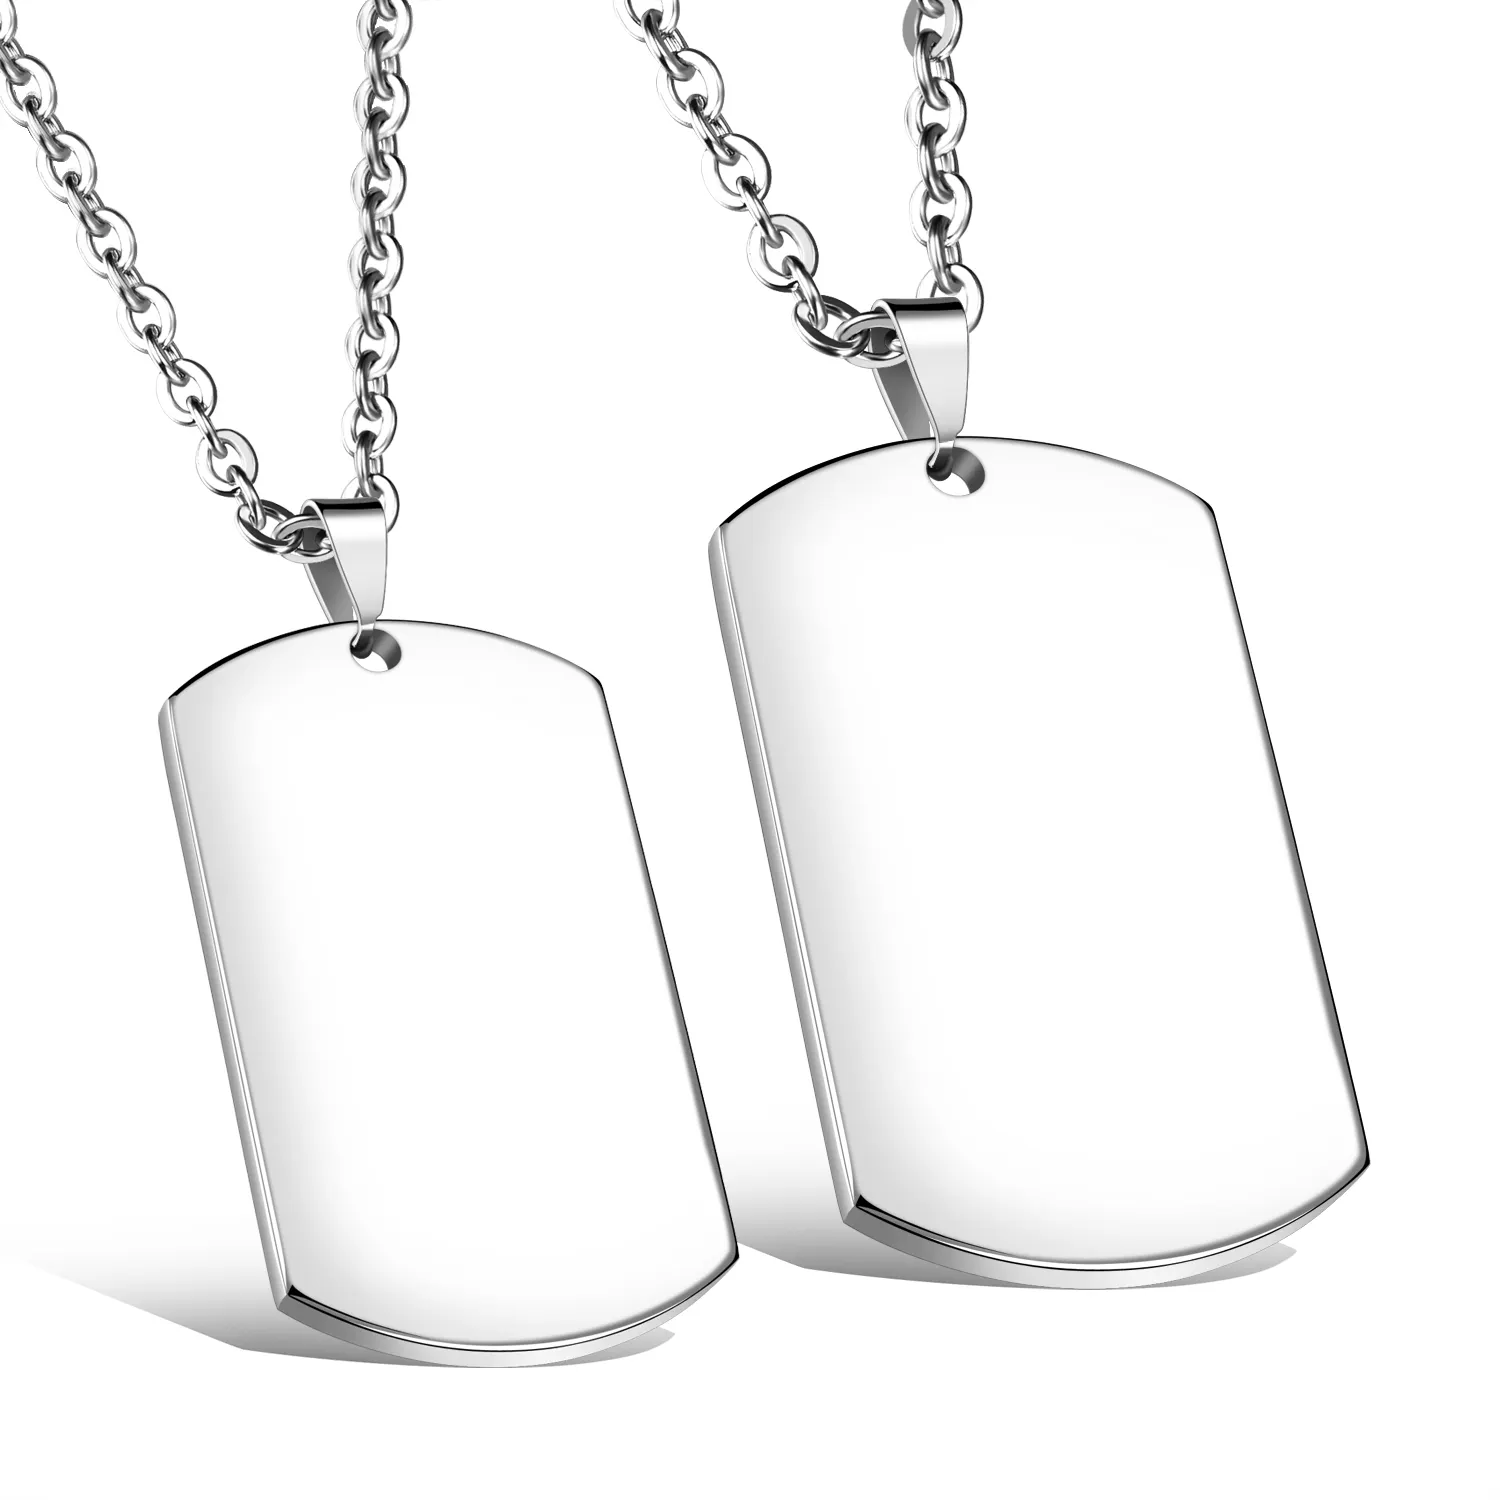 Couple Stainless Steel Jewellery Personalized Women Men Blank Custom Dogtag Engraving Pendant Necklaces Jewelry